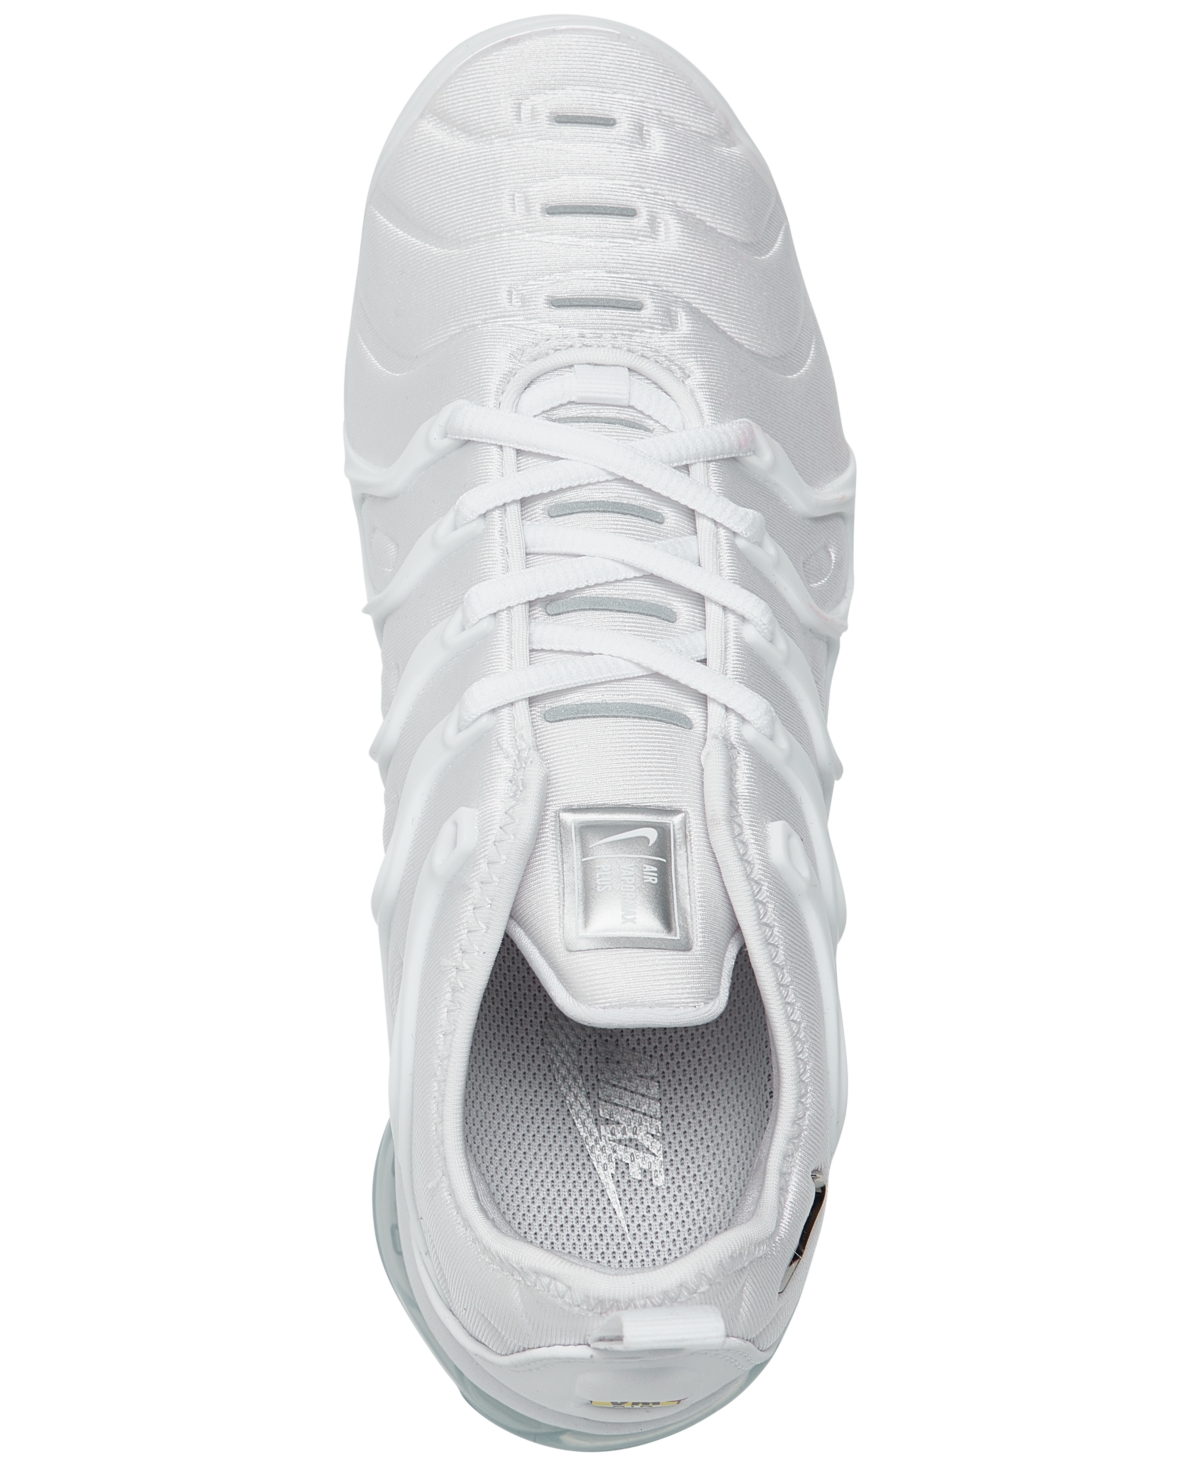 Shop Nike Women's Air Vapormax Plus Running Sneakers From Finish Line In White,metallic Silver